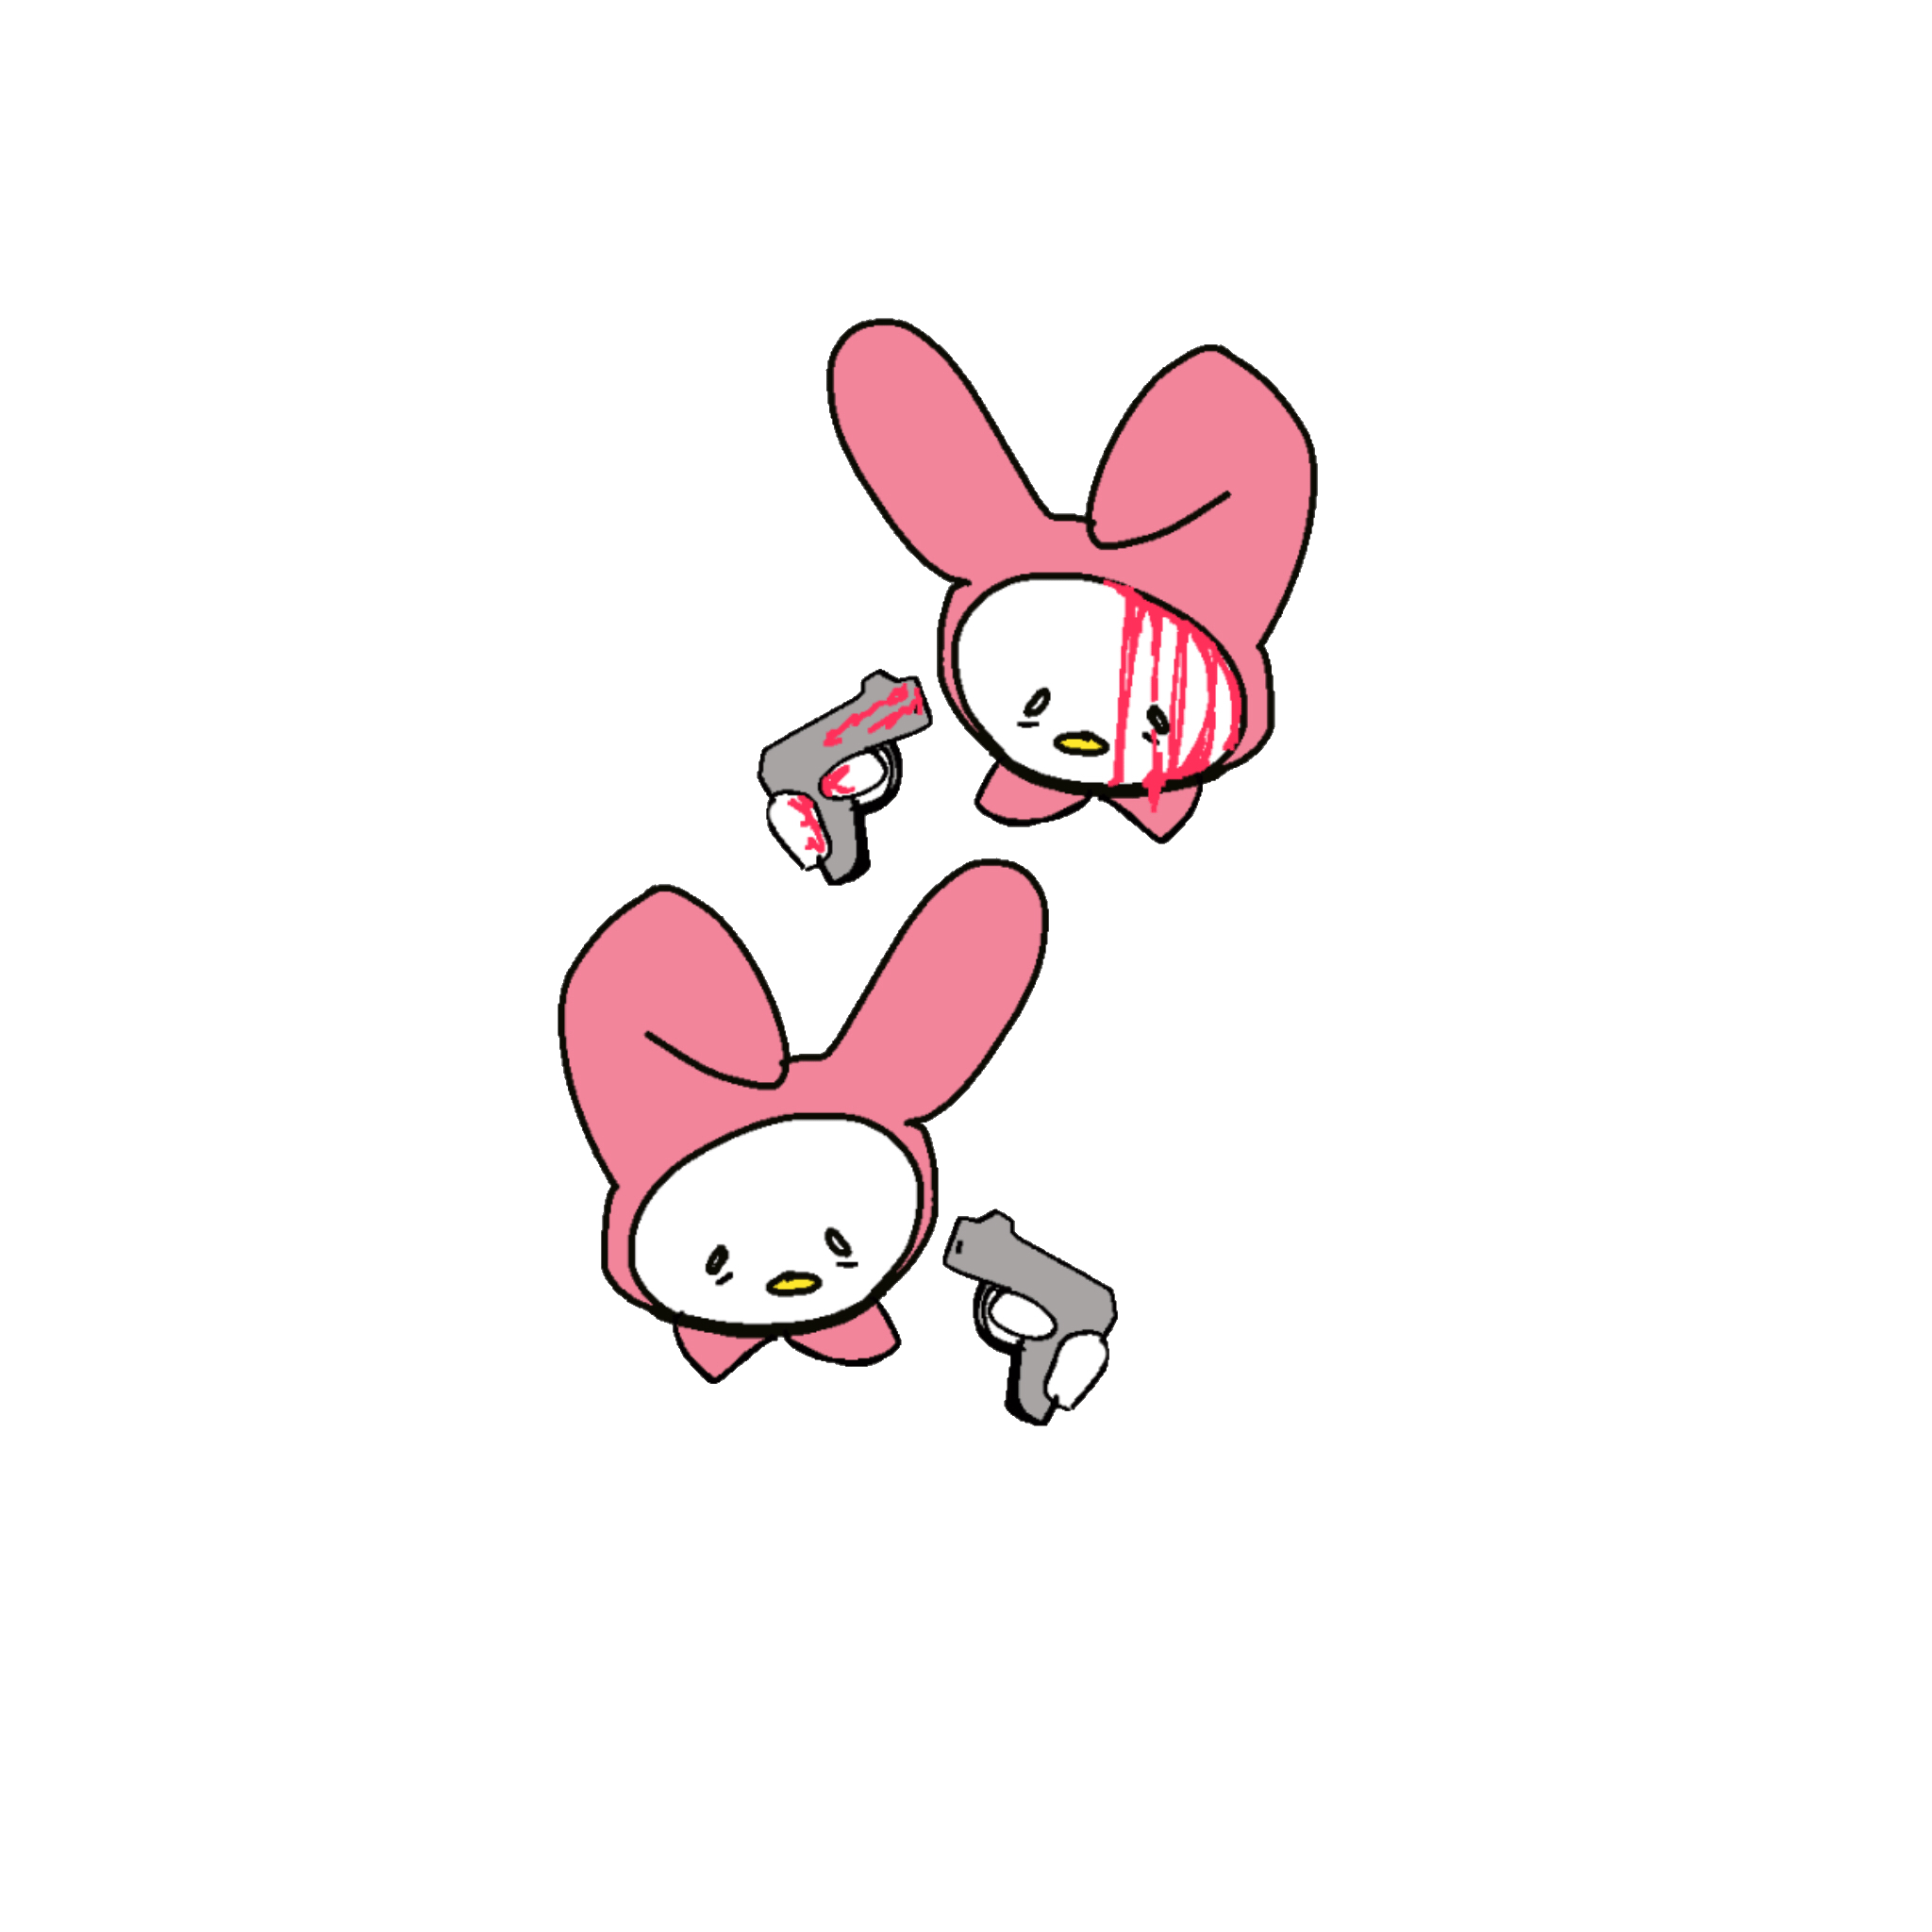 Two cute pink bunnies with guns on a green background - Traumacore